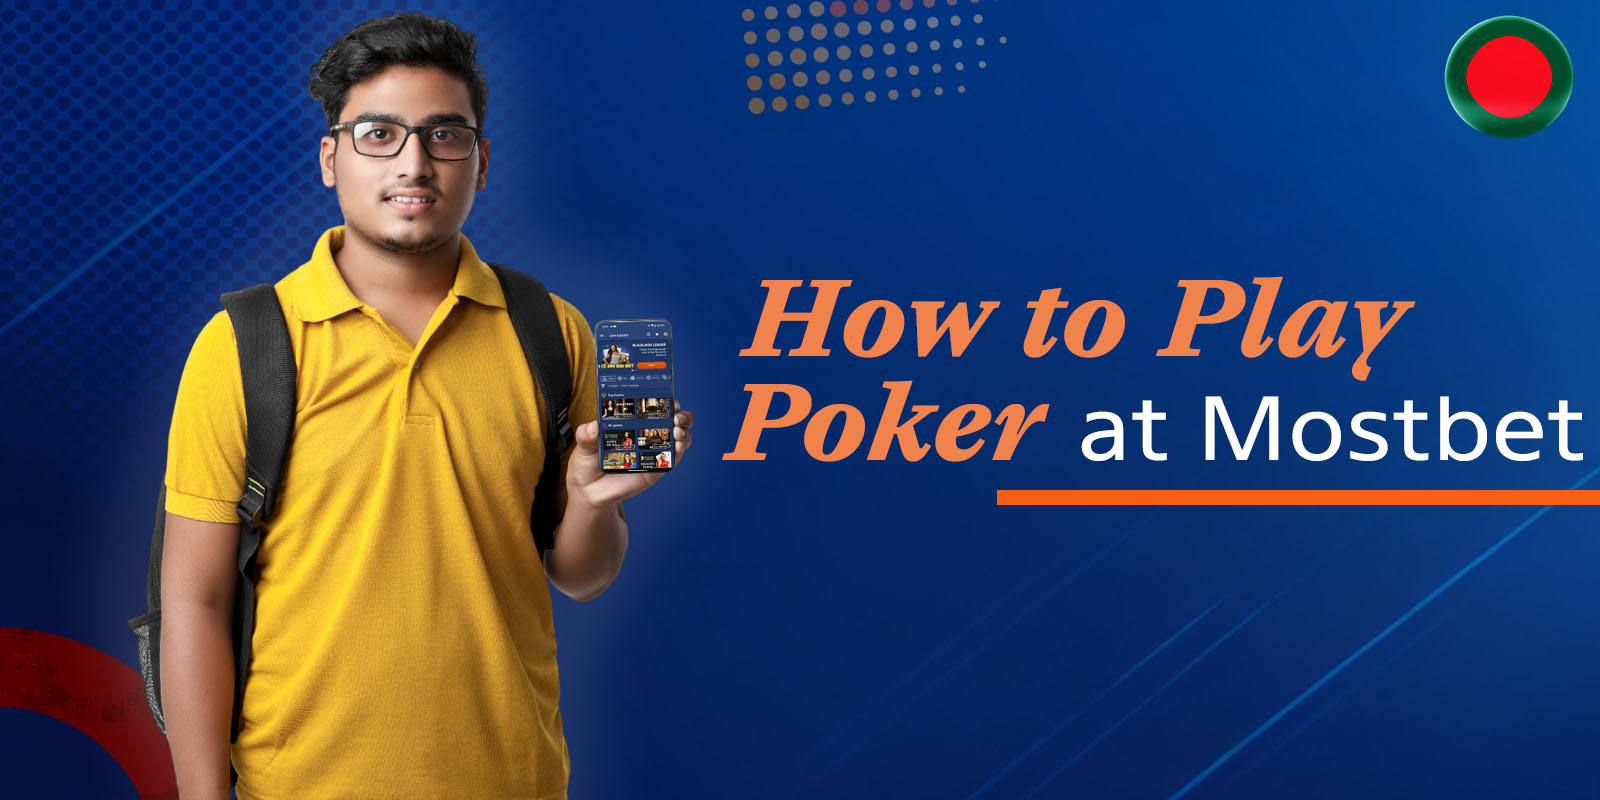 A quick way to get started playing poker